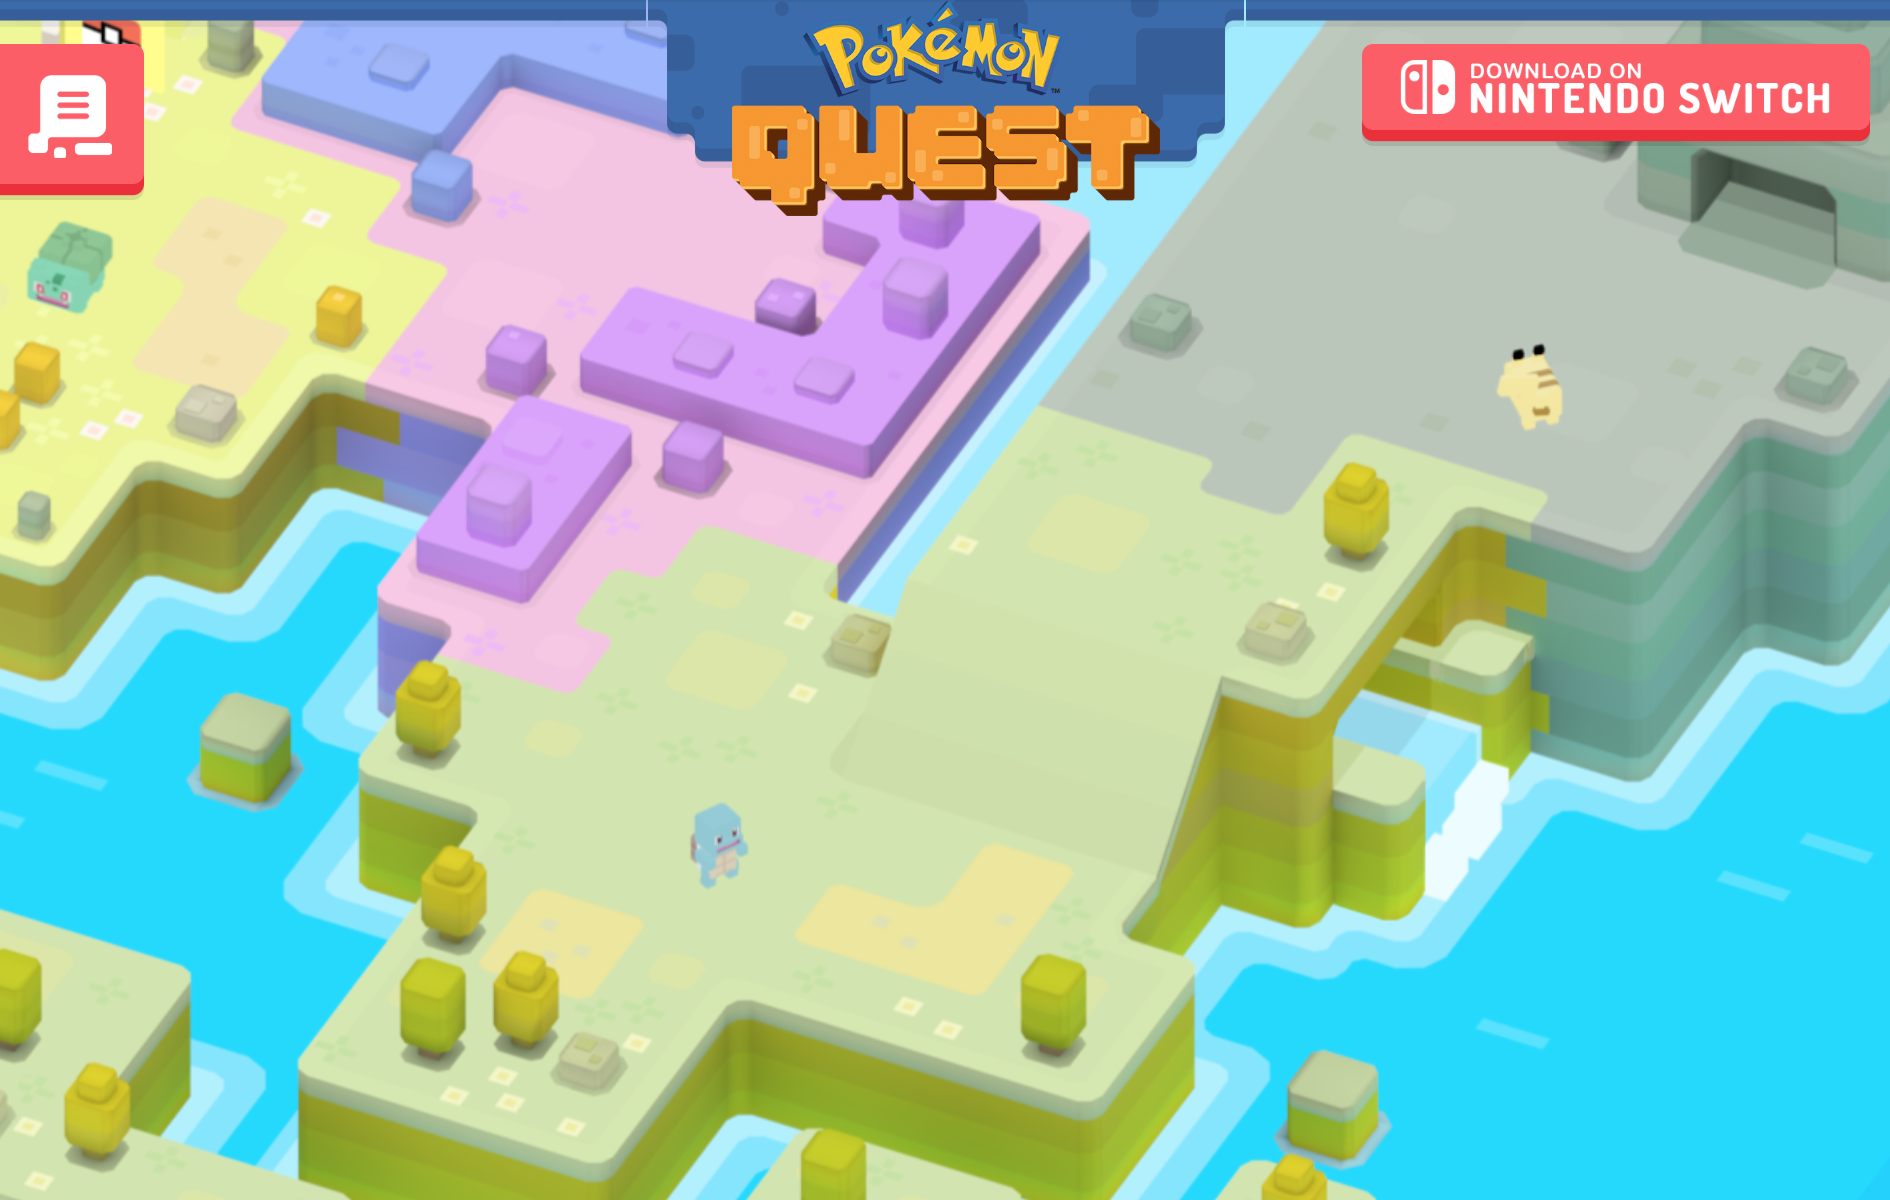 Pokémon Quest hits the Nintendo Switch with two more Pokémon titles on the way